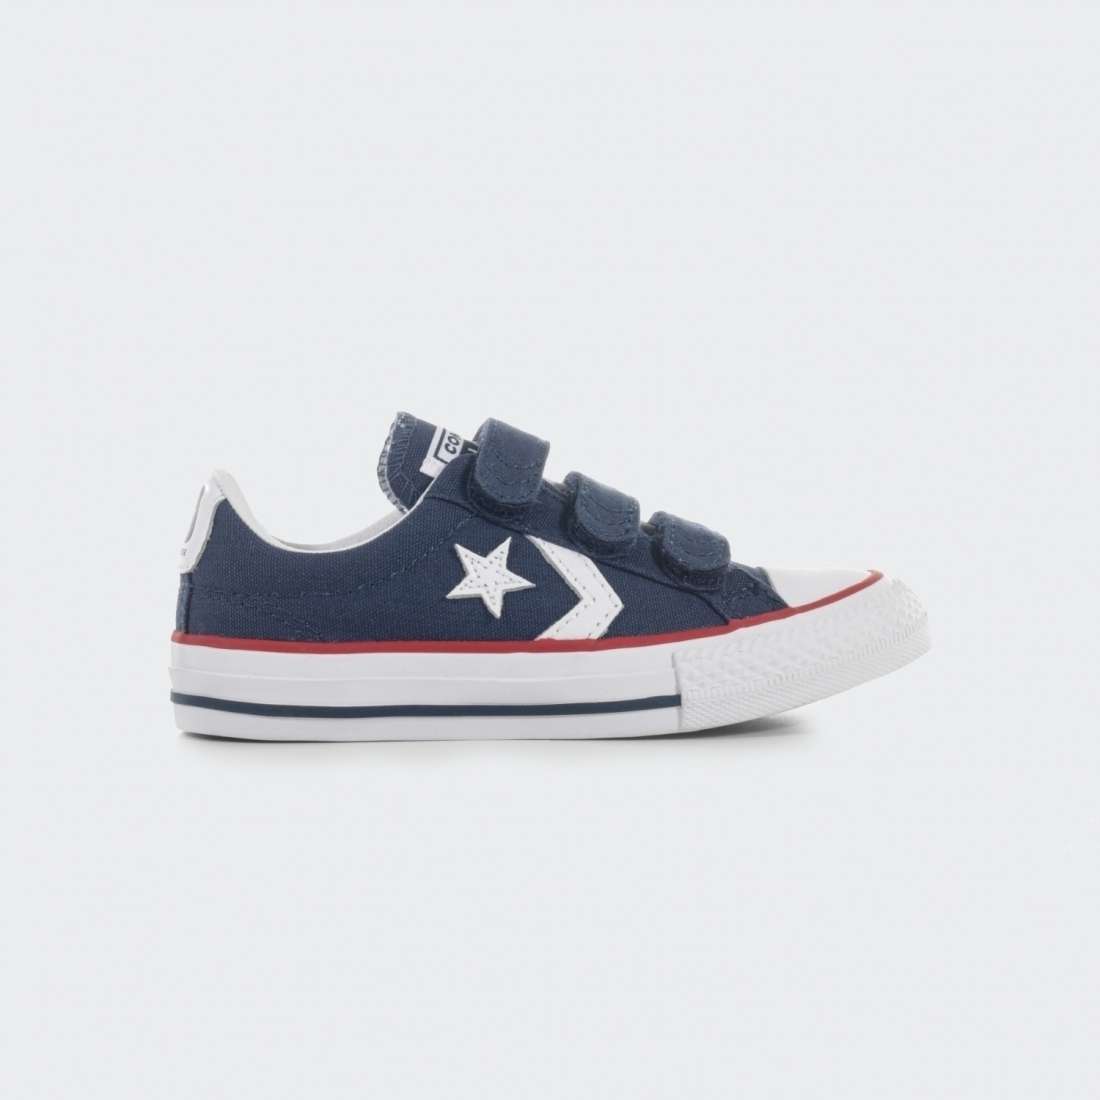 CONVERSE ALL STAR PLAYER 3V NAVY/WHITE/RED